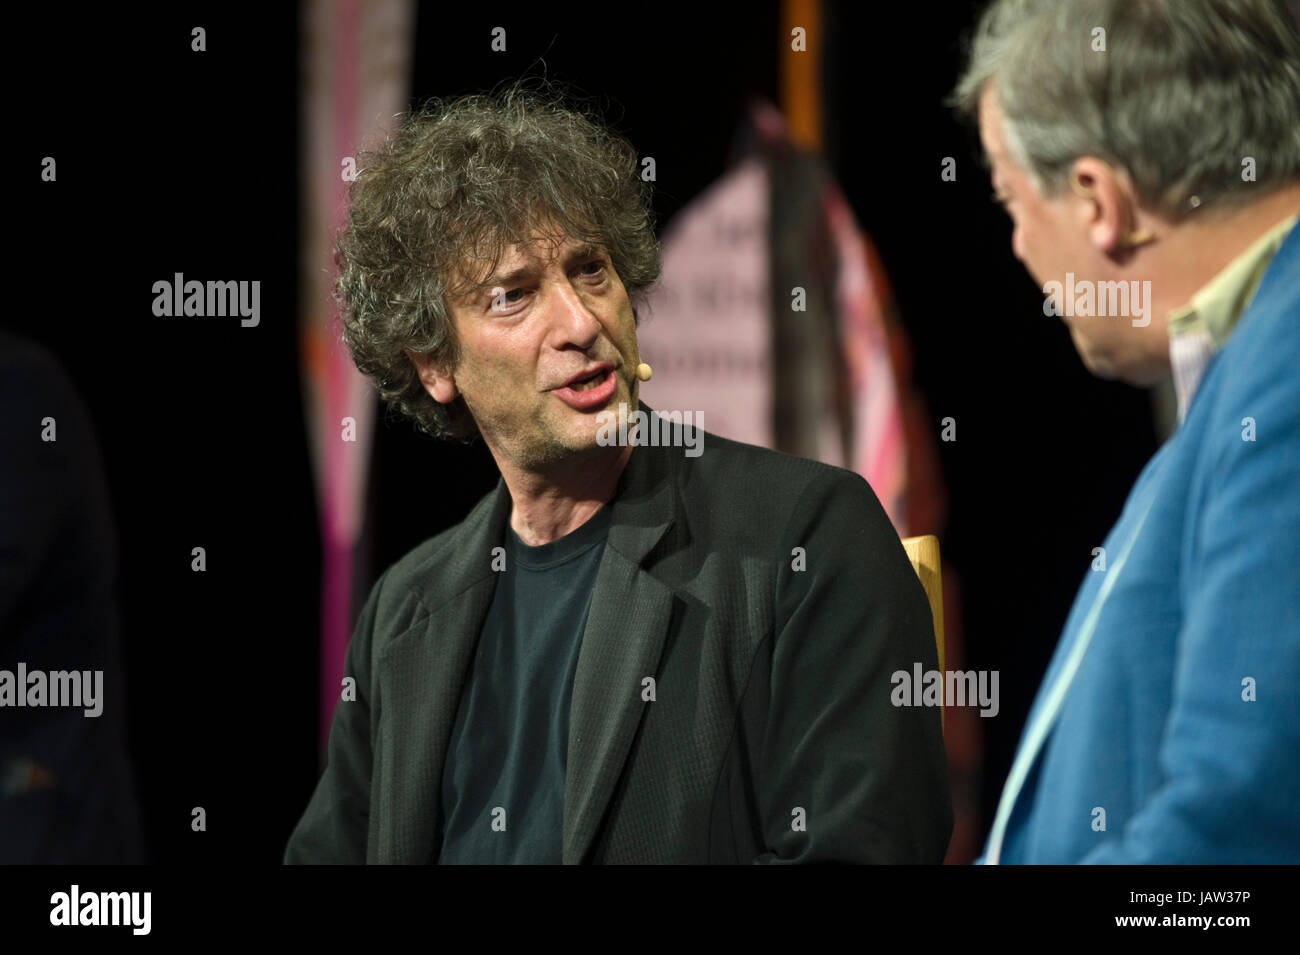 Neil Gaiman speaking to Stephen Fry on stage at Hay Festival 2017 Hay-on-Wye Powys Wales UK Stock Photo